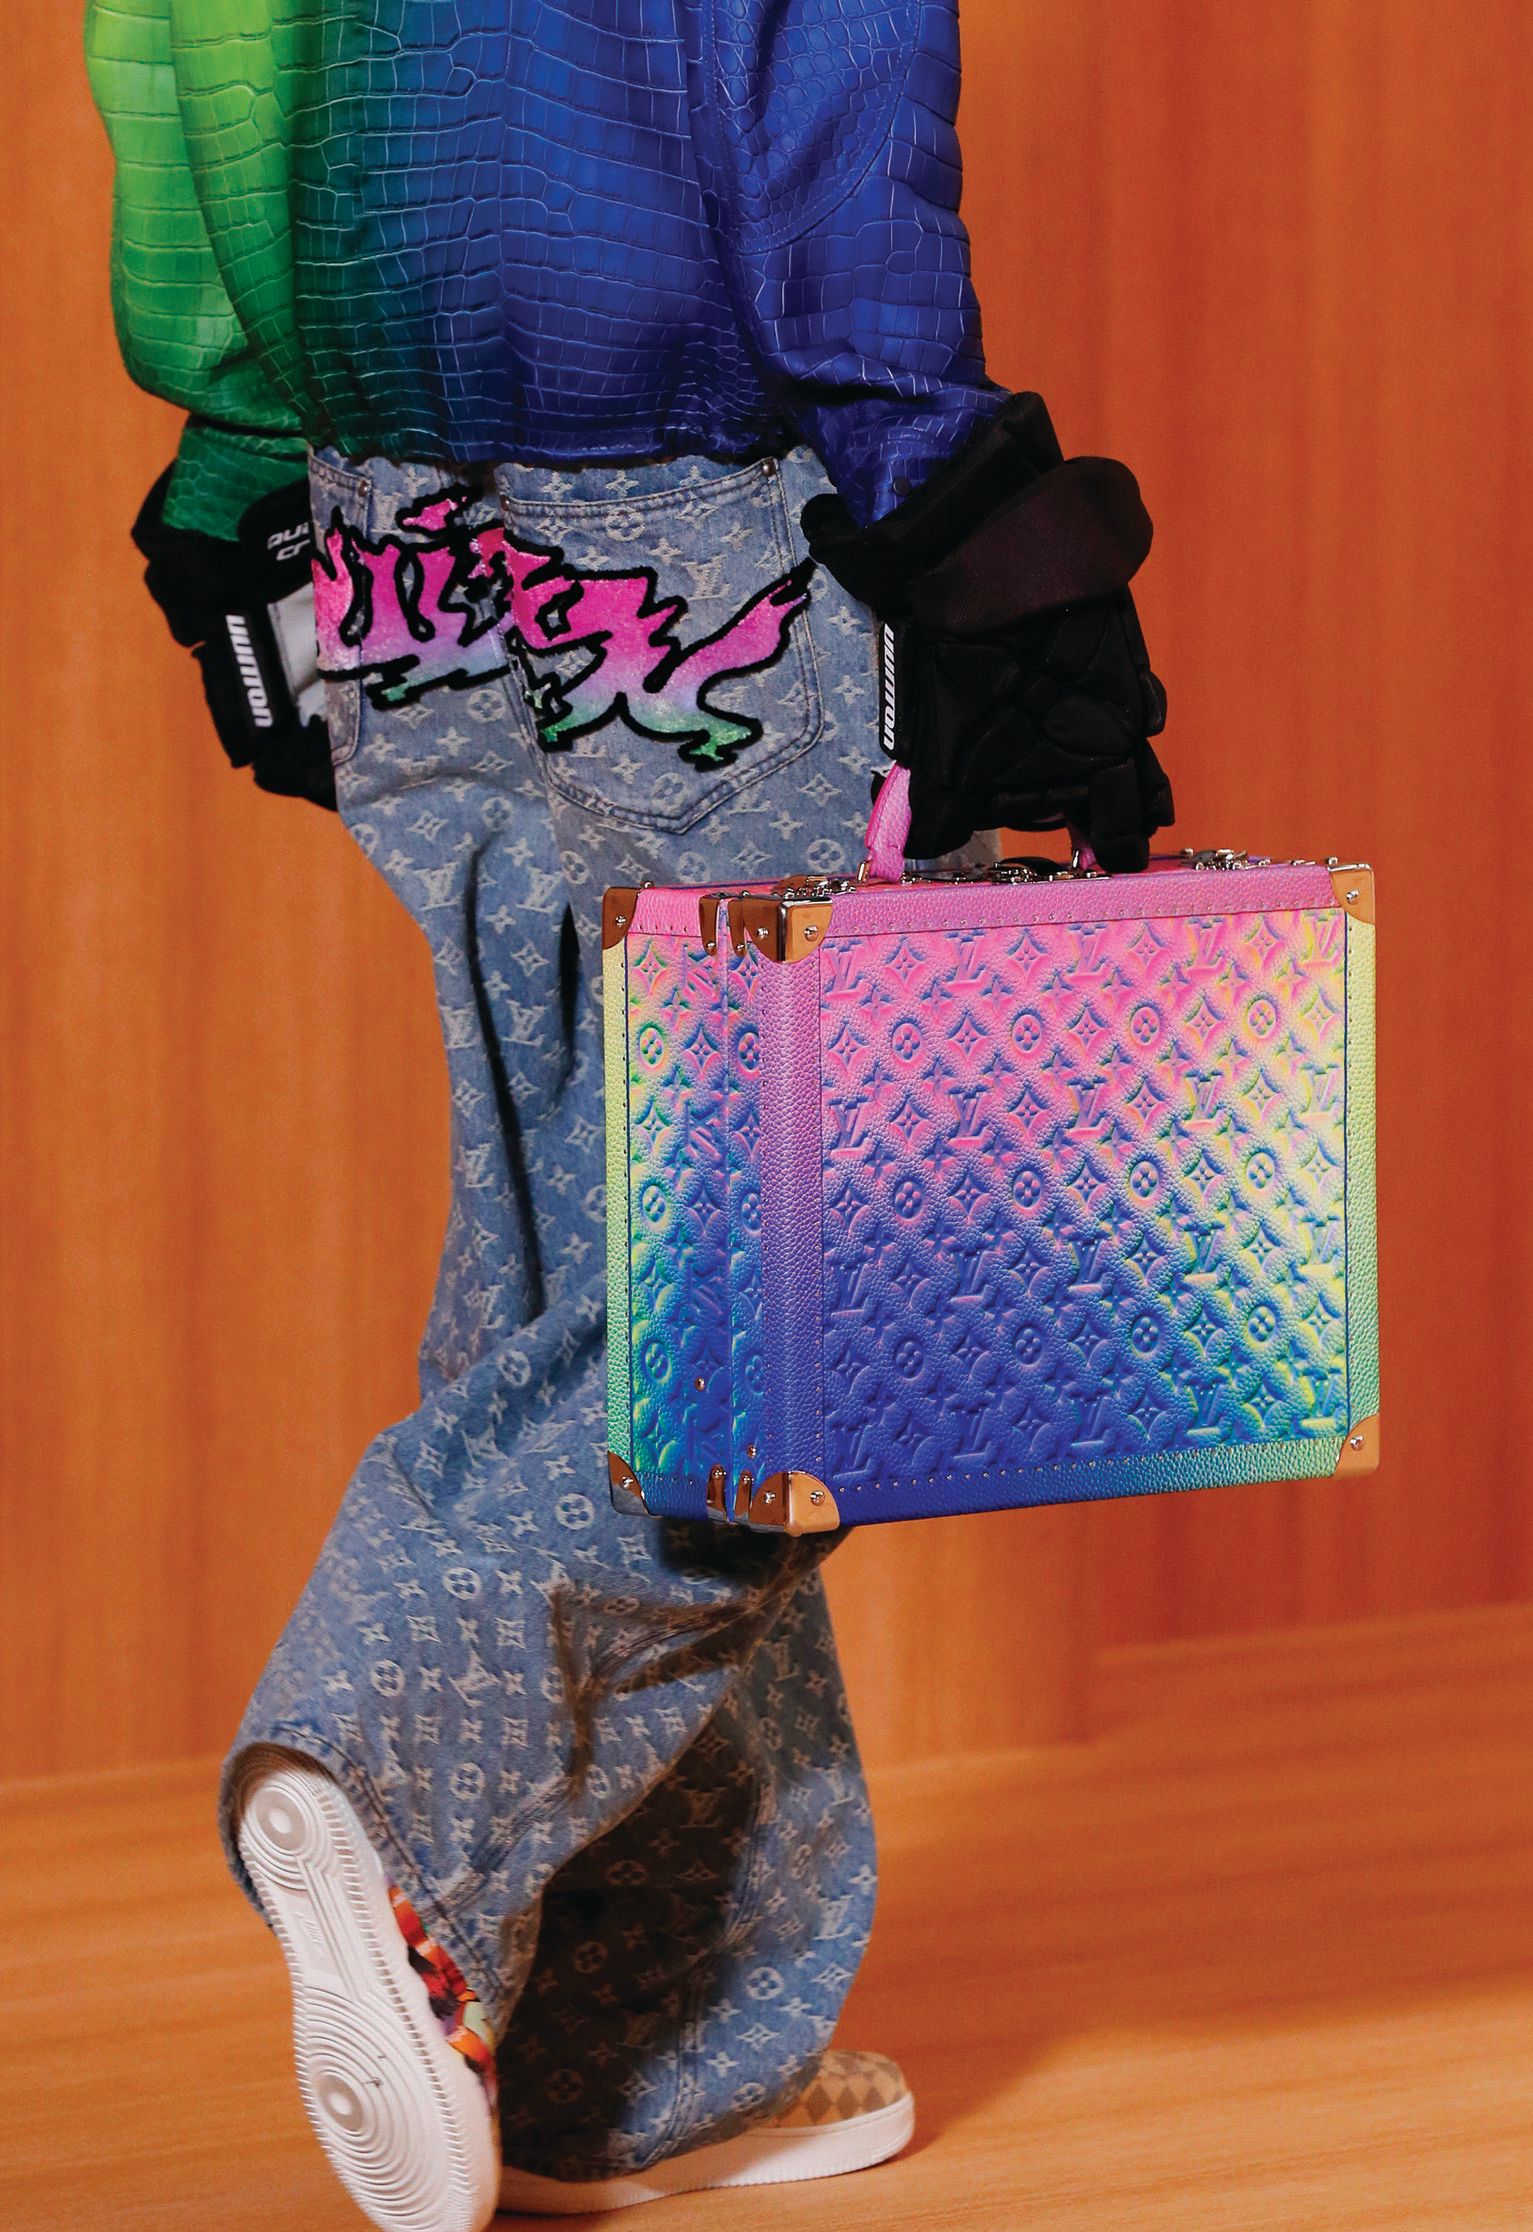 Pieces from Abloh’s SS22 collection for Louis Vuitton Men’s, including ready-to-wear and leather goods PHOTO COURTESY OF LOUIS VUITTON/LUDWIG BONNET